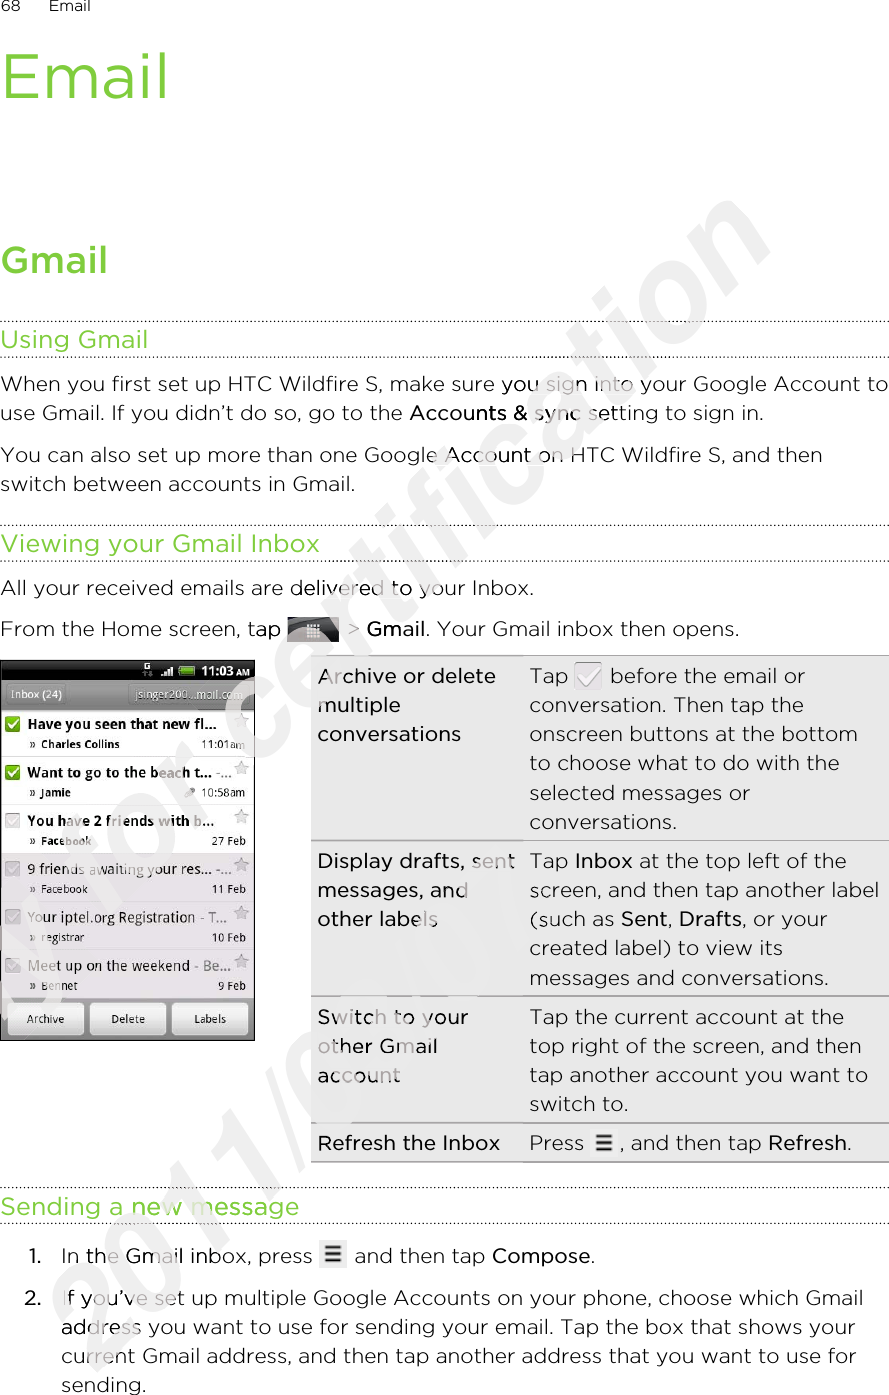 EmailGmailUsing GmailWhen you first set up HTC Wildfire S, make sure you sign into your Google Account touse Gmail. If you didn’t do so, go to the Accounts &amp; sync setting to sign in.You can also set up more than one Google Account on HTC Wildfire S, and thenswitch between accounts in Gmail.Viewing your Gmail InboxAll your received emails are delivered to your Inbox.From the Home screen, tap   &gt; Gmail. Your Gmail inbox then opens.Archive or deletemultipleconversationsTap   before the email orconversation. Then tap theonscreen buttons at the bottomto choose what to do with theselected messages orconversations.Display drafts, sentmessages, andother labelsTap Inbox at the top left of thescreen, and then tap another label(such as Sent, Drafts, or yourcreated label) to view itsmessages and conversations.Switch to yourother GmailaccountTap the current account at thetop right of the screen, and thentap another account you want toswitch to.Refresh the Inbox Press  , and then tap Refresh.Sending a new message1. In the Gmail inbox, press   and then tap Compose.2. If you’ve set up multiple Google Accounts on your phone, choose which Gmailaddress you want to use for sending your email. Tap the box that shows yourcurrent Gmail address, and then tap another address that you want to use forsending.68 EmailOnly Only Only Only for certification certification certification When you first set up HTC Wildfire S, make sure you sign into your Google Account tocertification When you first set up HTC Wildfire S, make sure you sign into your Google Account toAccounts &amp; synccertification Accounts &amp; sync setting to sign in.certification  setting to sign in.You can also set up more than one Google Account on HTC Wildfire S, and thencertification You can also set up more than one Google Account on HTC Wildfire S, and thencertification certification certification All your received emails are delivered to your Inbox.certification All your received emails are delivered to your Inbox.From the Home screen, tap certification From the Home screen, tap certification  &gt; certification  &gt; Gmailcertification Gmailcertification certification certification certification certification Archive or deletecertification Archive or deletemultiplecertification multiplecertification 2011/03/072011/03/072011/03/07Display drafts, sent2011/03/07Display drafts, sentmessages, and2011/03/07messages, andother labels2011/03/07other labelsscreen, and then tap another label2011/03/07screen, and then tap another label(such as 2011/03/07(such as created label) to view its2011/03/07created label) to view its2011/03/07Switch to your2011/03/07Switch to yourother Gmail2011/03/07other Gmailaccount2011/03/07account2011/03/07Refresh the Inbox2011/03/07Refresh the Inbox2011/03/072011/03/072011/03/07Sending a new message2011/03/07Sending a new message2011/03/072011/03/072011/03/07In the Gmail inbox, press 2011/03/07In the Gmail inbox, press 2.2011/03/072.If you’ve set up multiple Google Accounts on your phone, choose which Gmail2011/03/07If you’ve set up multiple Google Accounts on your phone, choose which Gmailaddress you want to use for sending your email. Tap the box that shows your2011/03/07address you want to use for sending your email. Tap the box that shows your2011/03/07current Gmail address, and then tap another address that you want to use for2011/03/07current Gmail address, and then tap another address that you want to use for